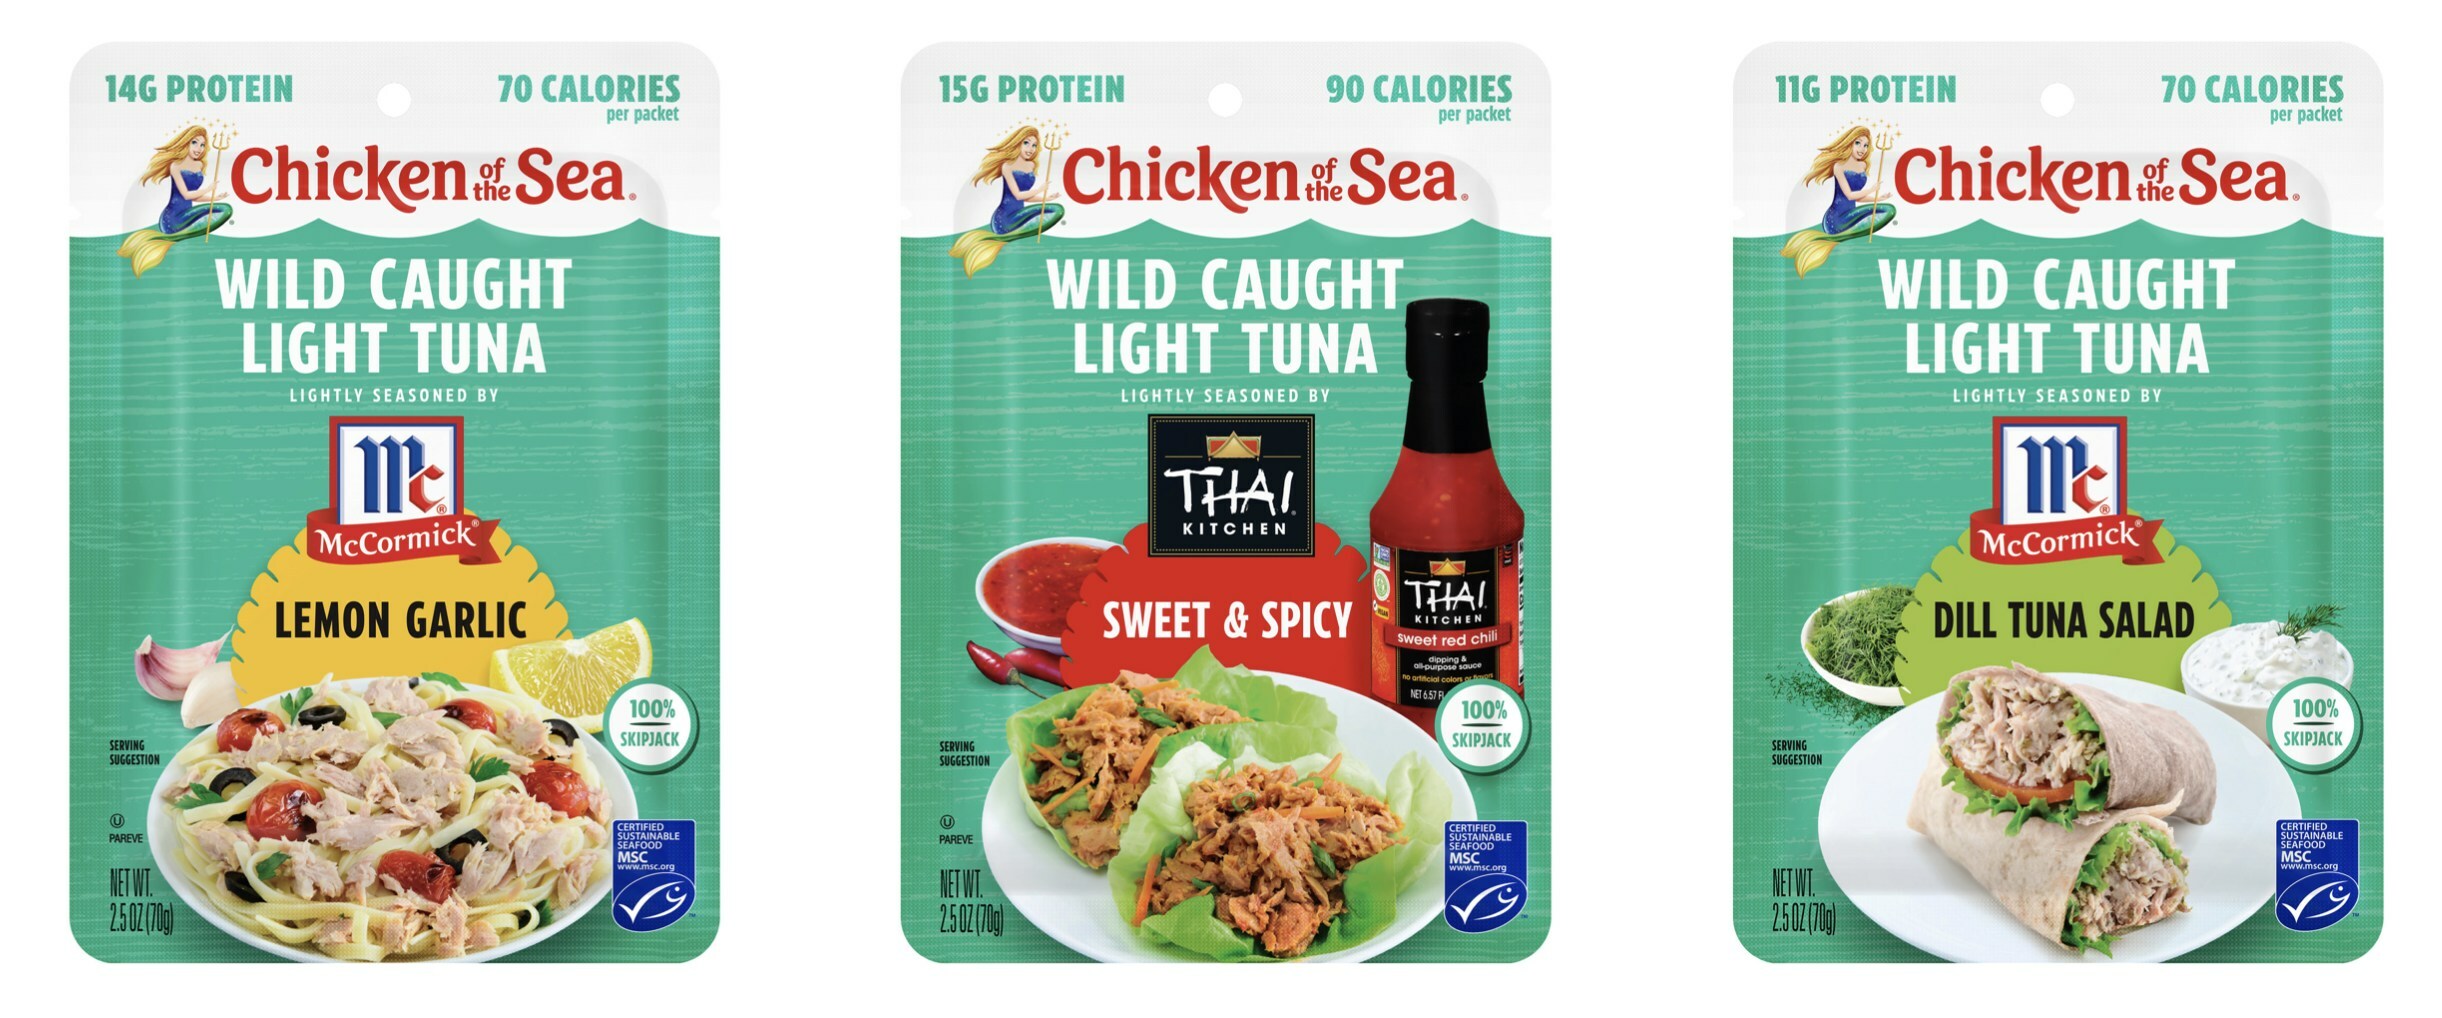 Chicken of the Sea Partners with Spice Giant McCormick to Create New Tuna Packet Flavors